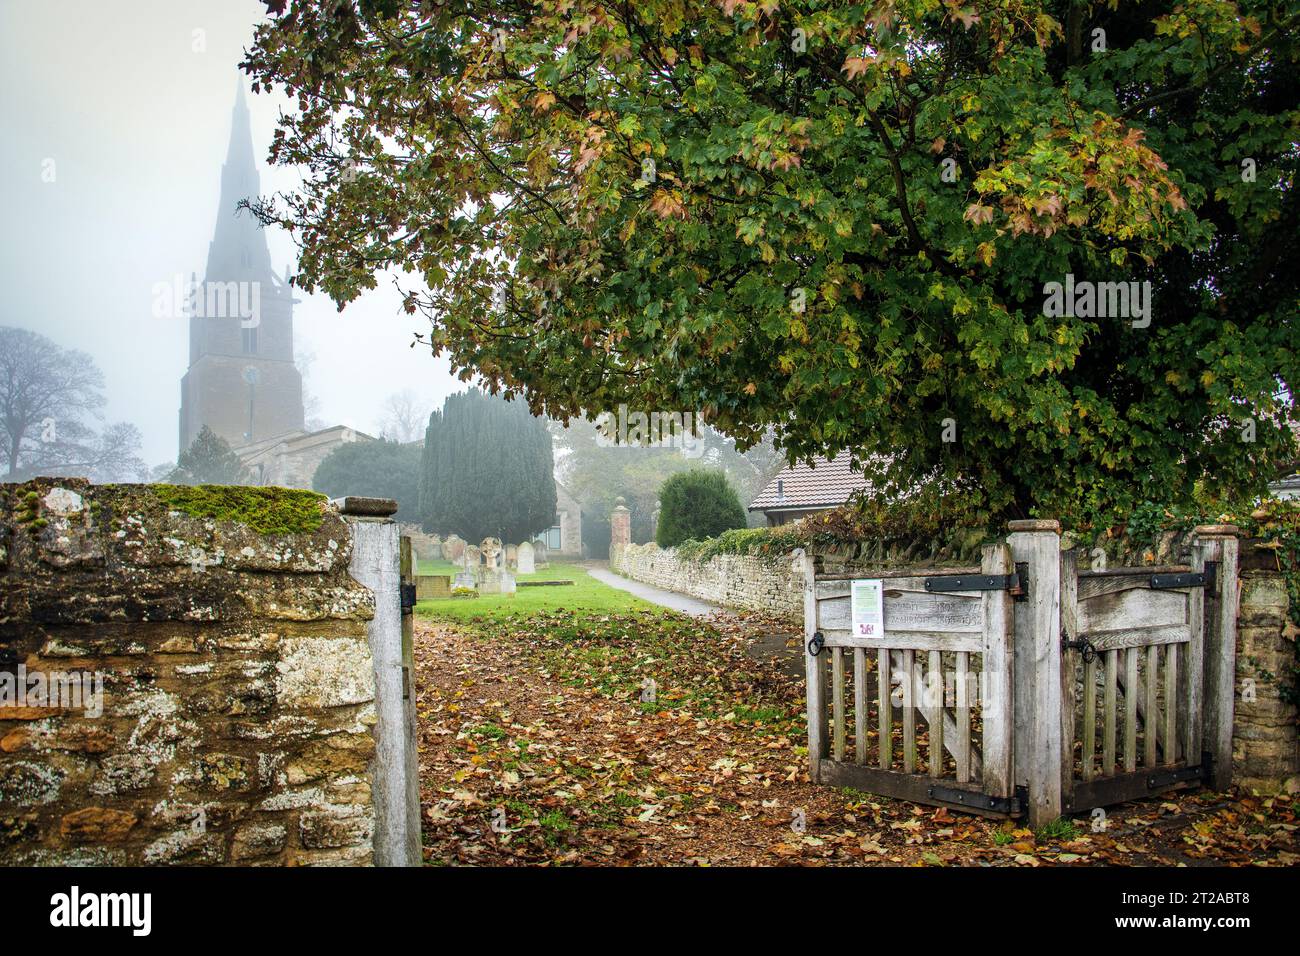 In autumn, in the village of Sharnbrook, Bedfordshire, England, UK, looking through a gate towards St Peter's parish church shrouded in mist Stock Photo